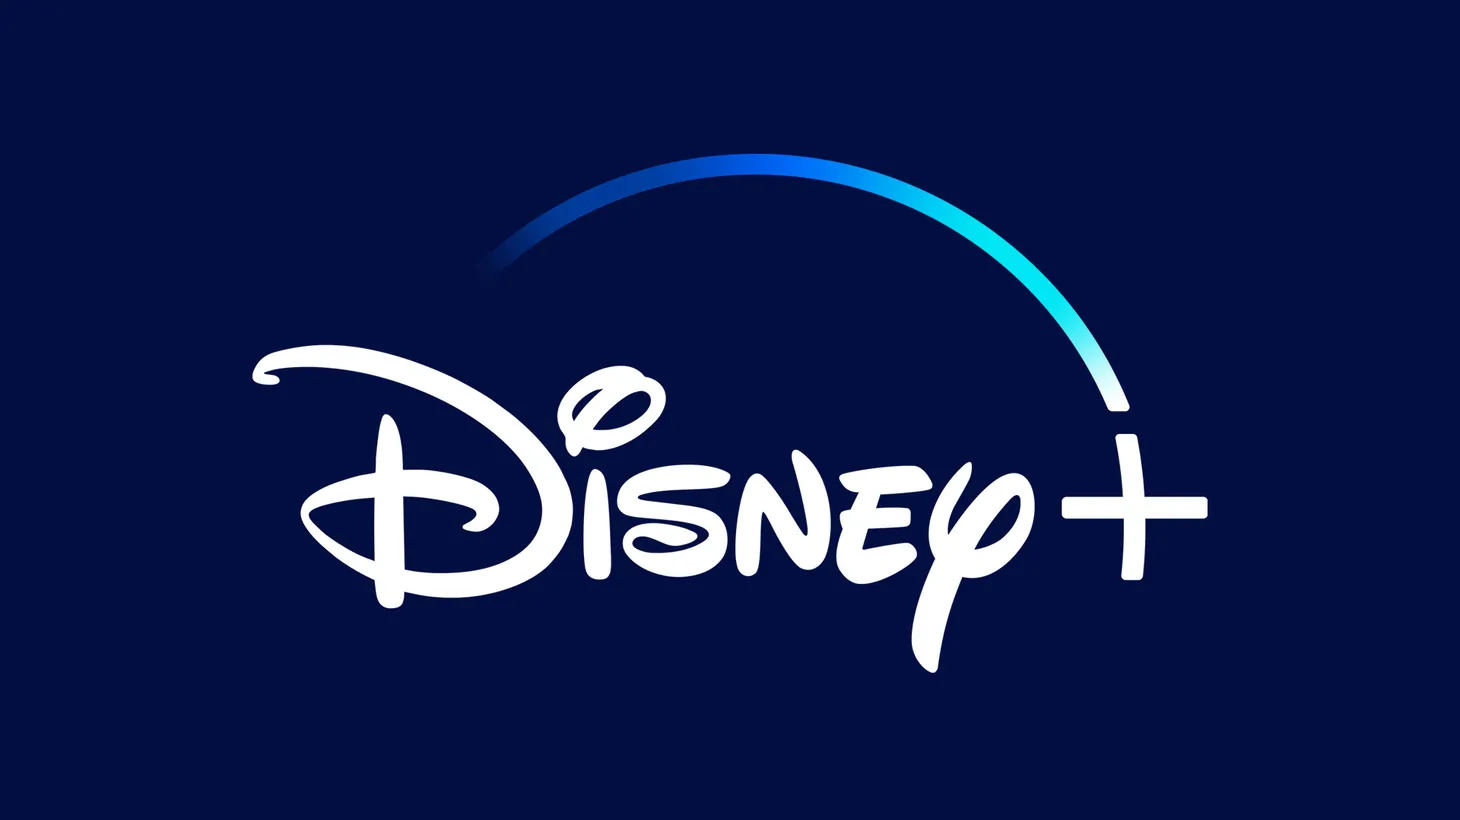 Disney recently announced that they added 8 million new subscribers to their streaming service Disney+.